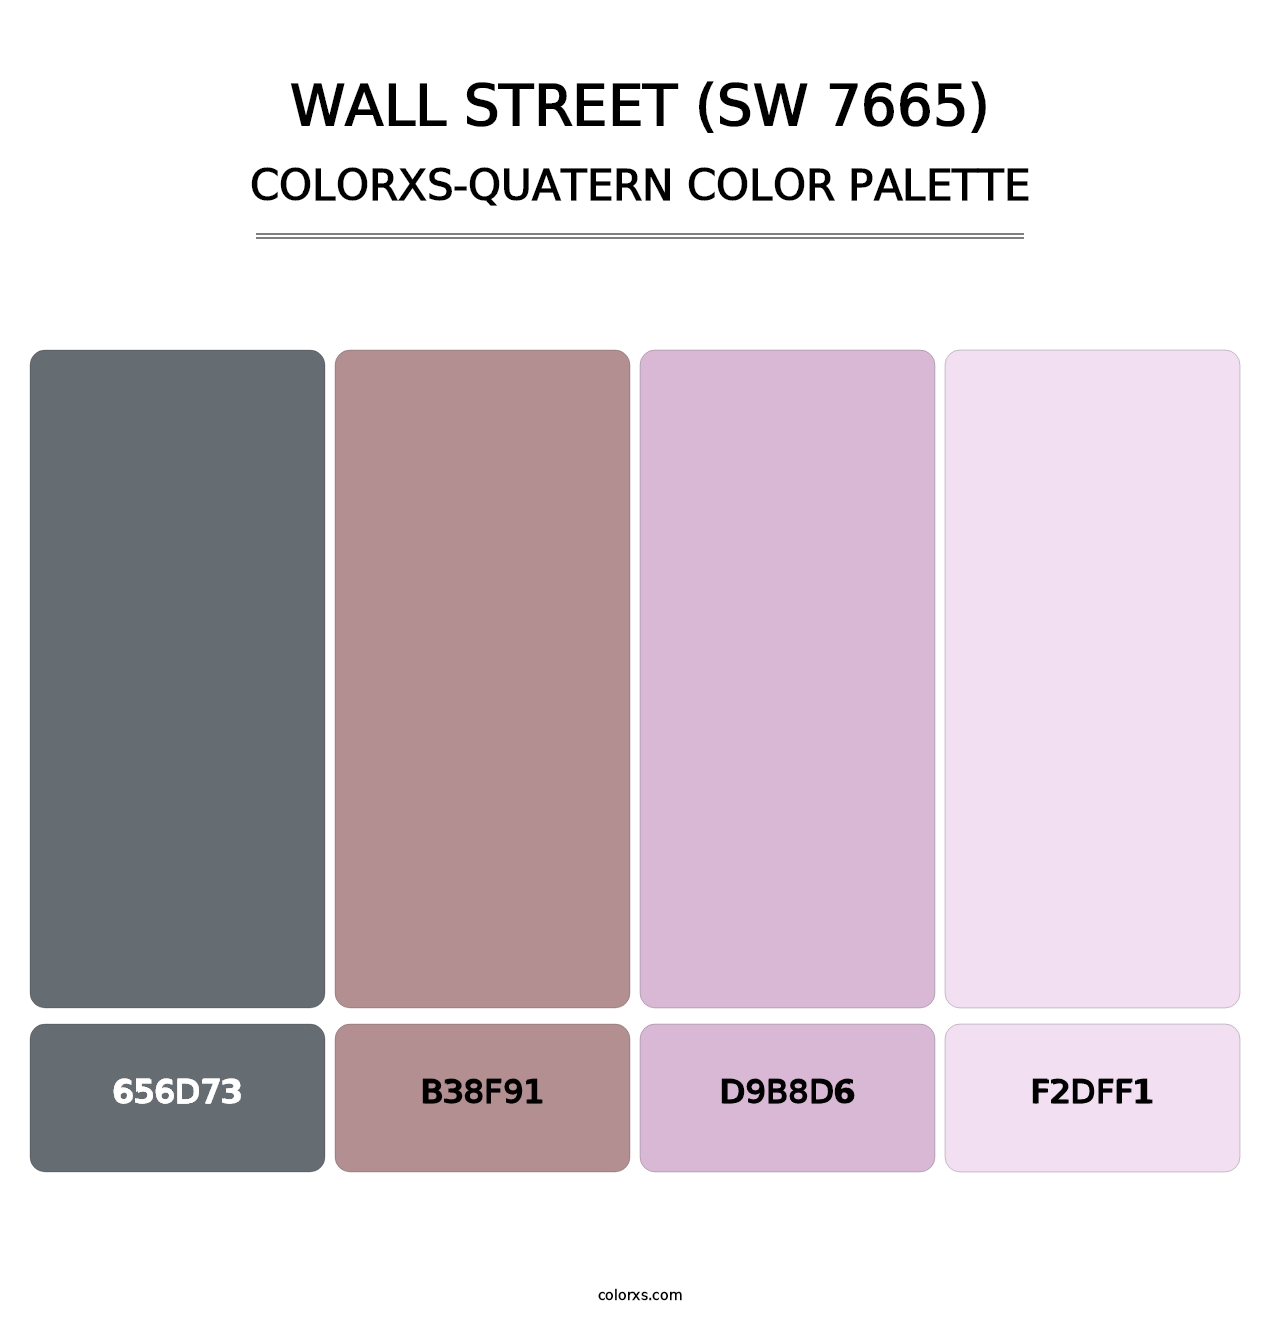 Wall Street (SW 7665) - Colorxs Quatern Palette